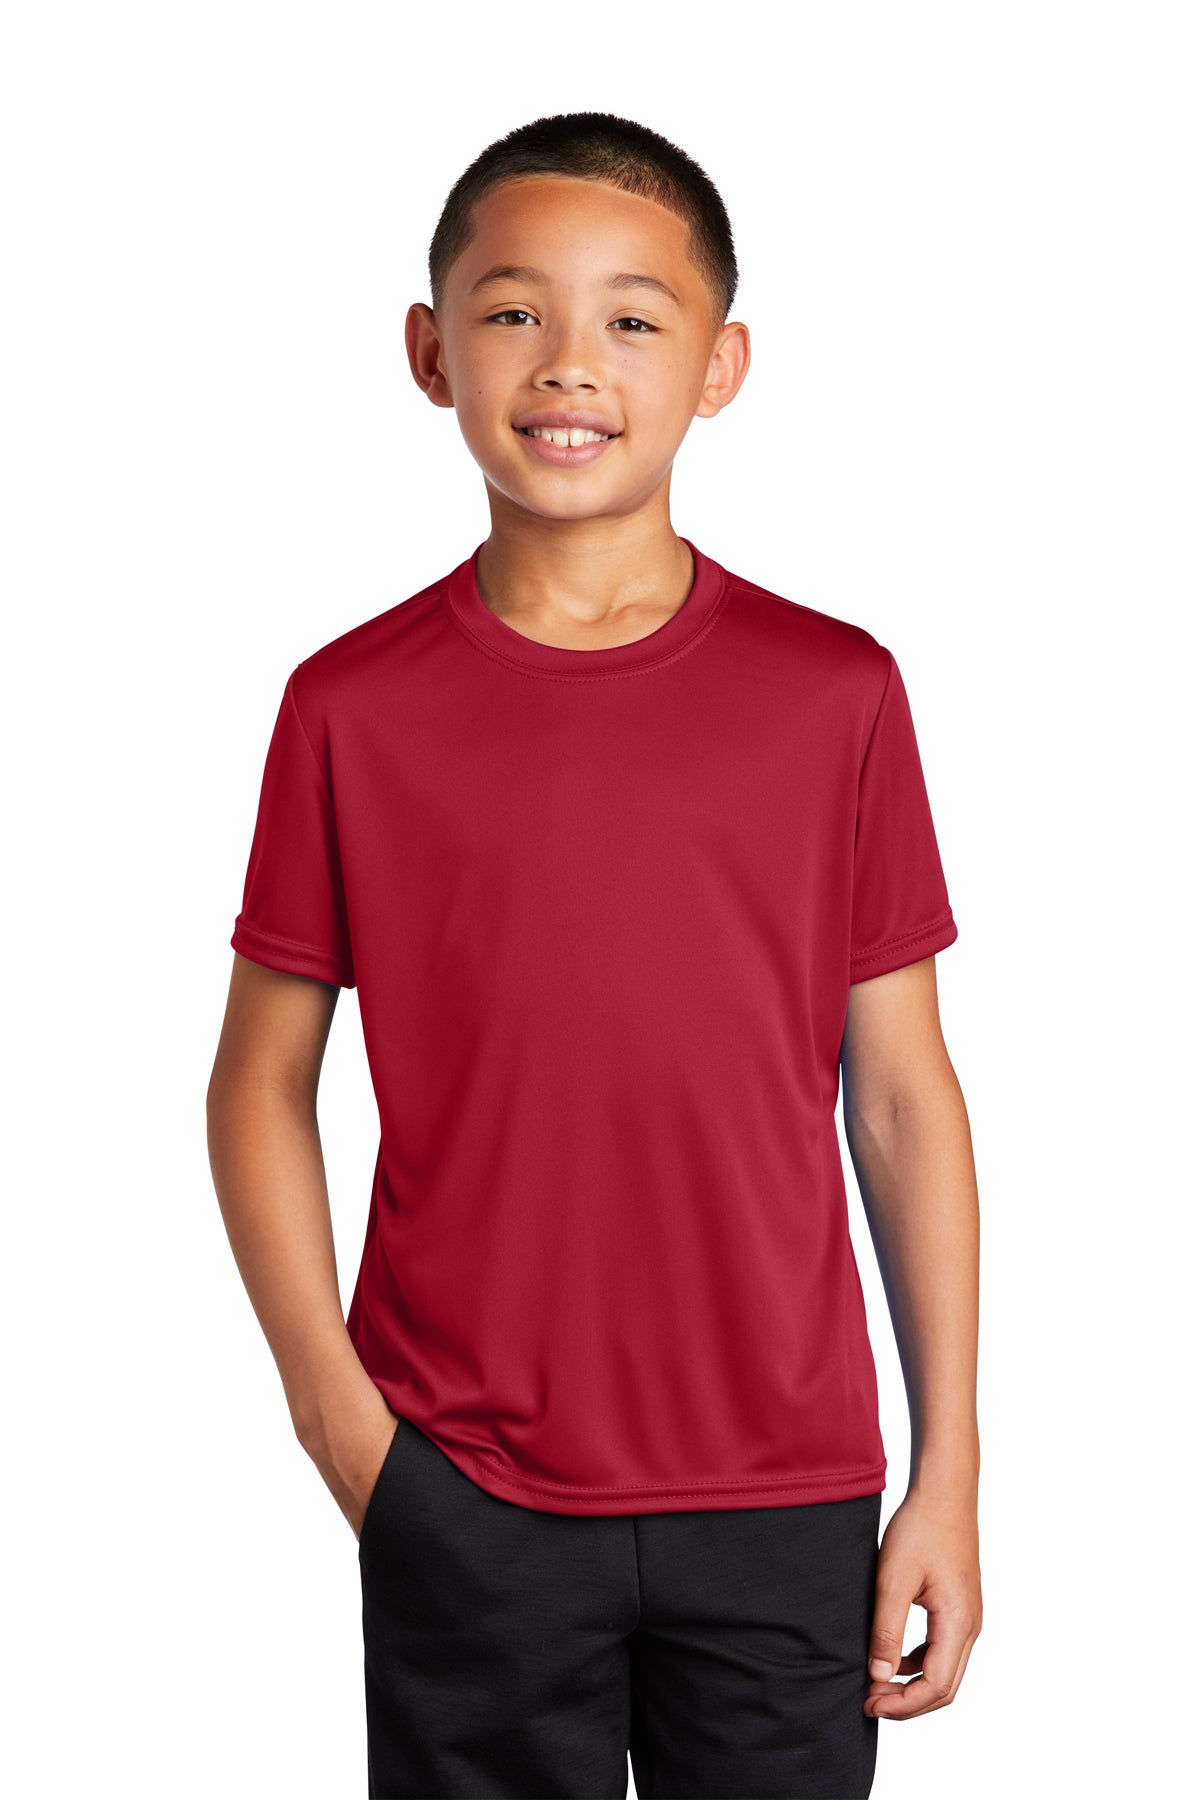 Port & Company Youth Performance Tee - XL Red